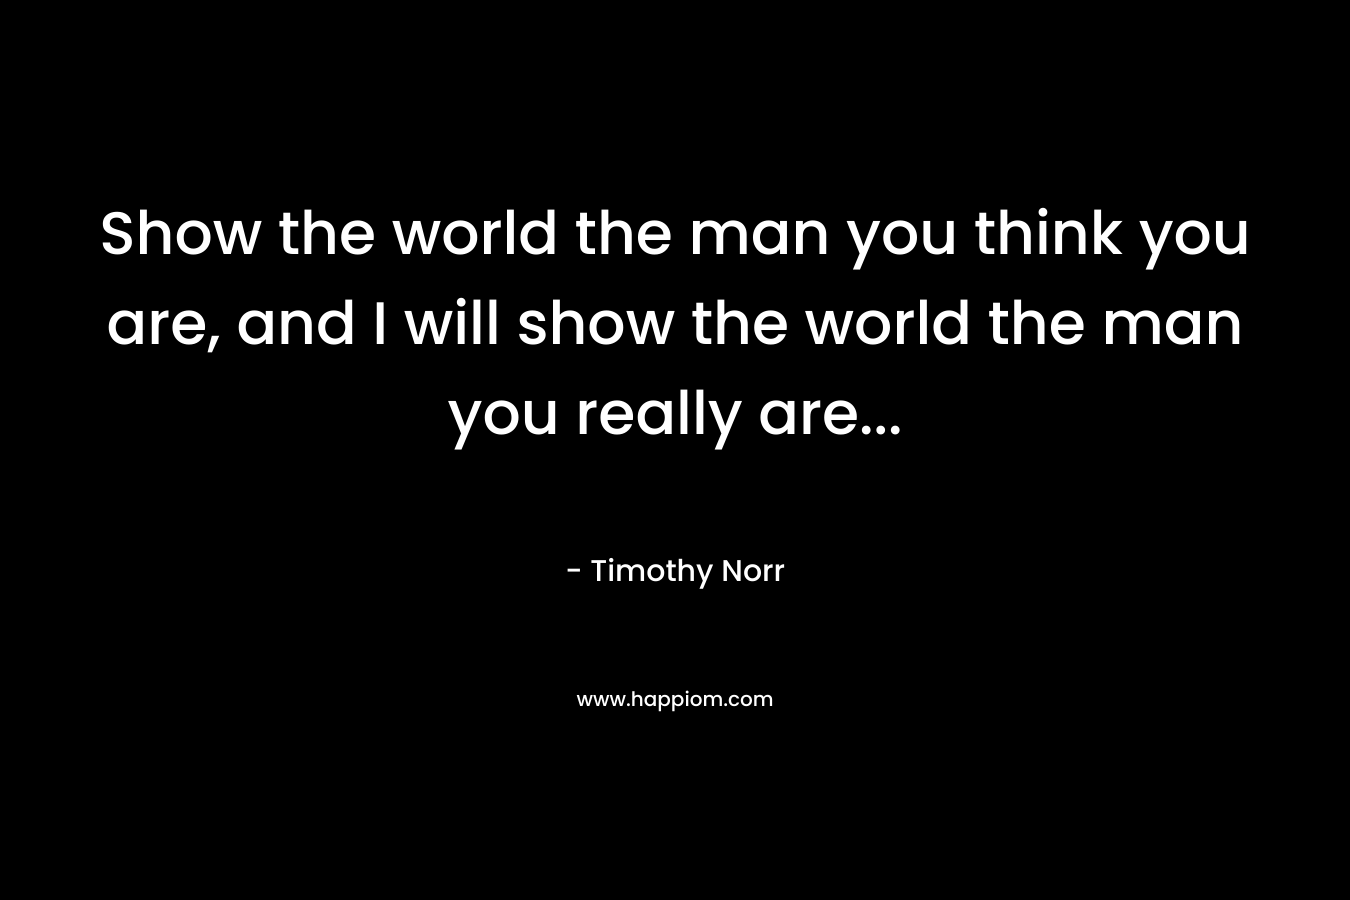 Show the world the man you think you are, and I will show the world the man you really are...